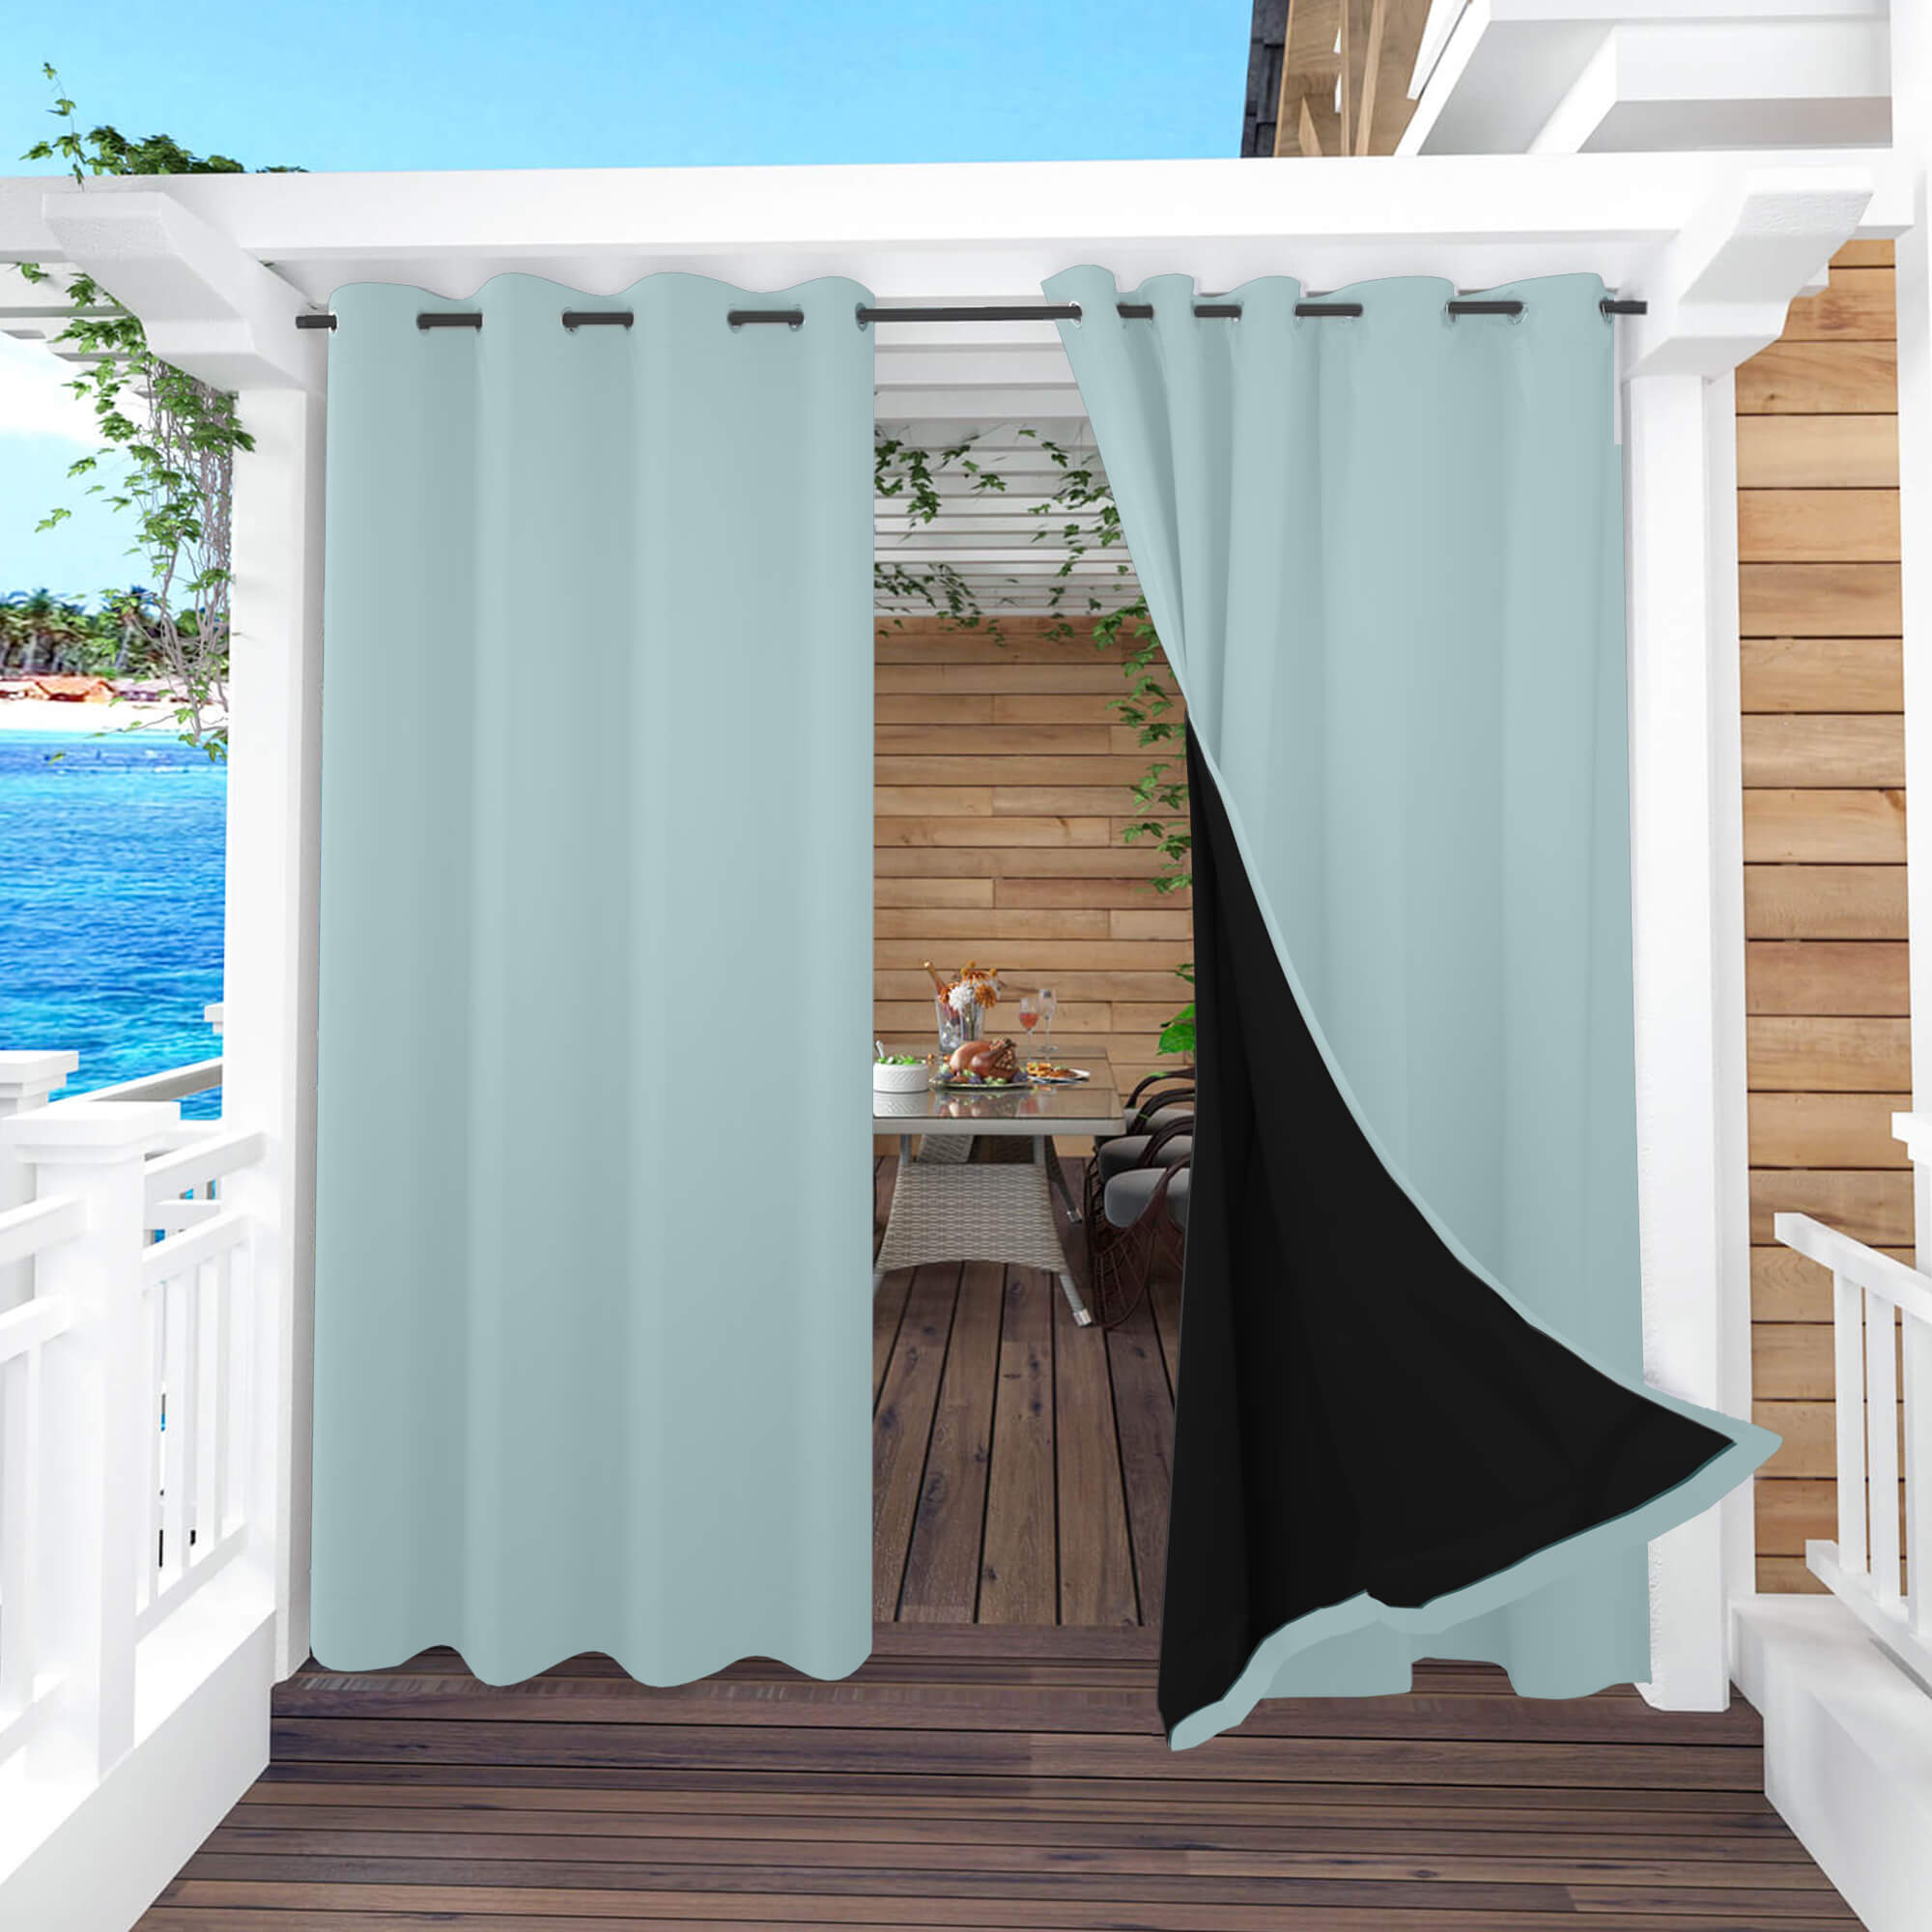 Snowcity Thermal Curtains/Drapes 1 Panel Pale Blue | Waterproof Curtains Grommet/Tab Top | Custom Blackout Curtains